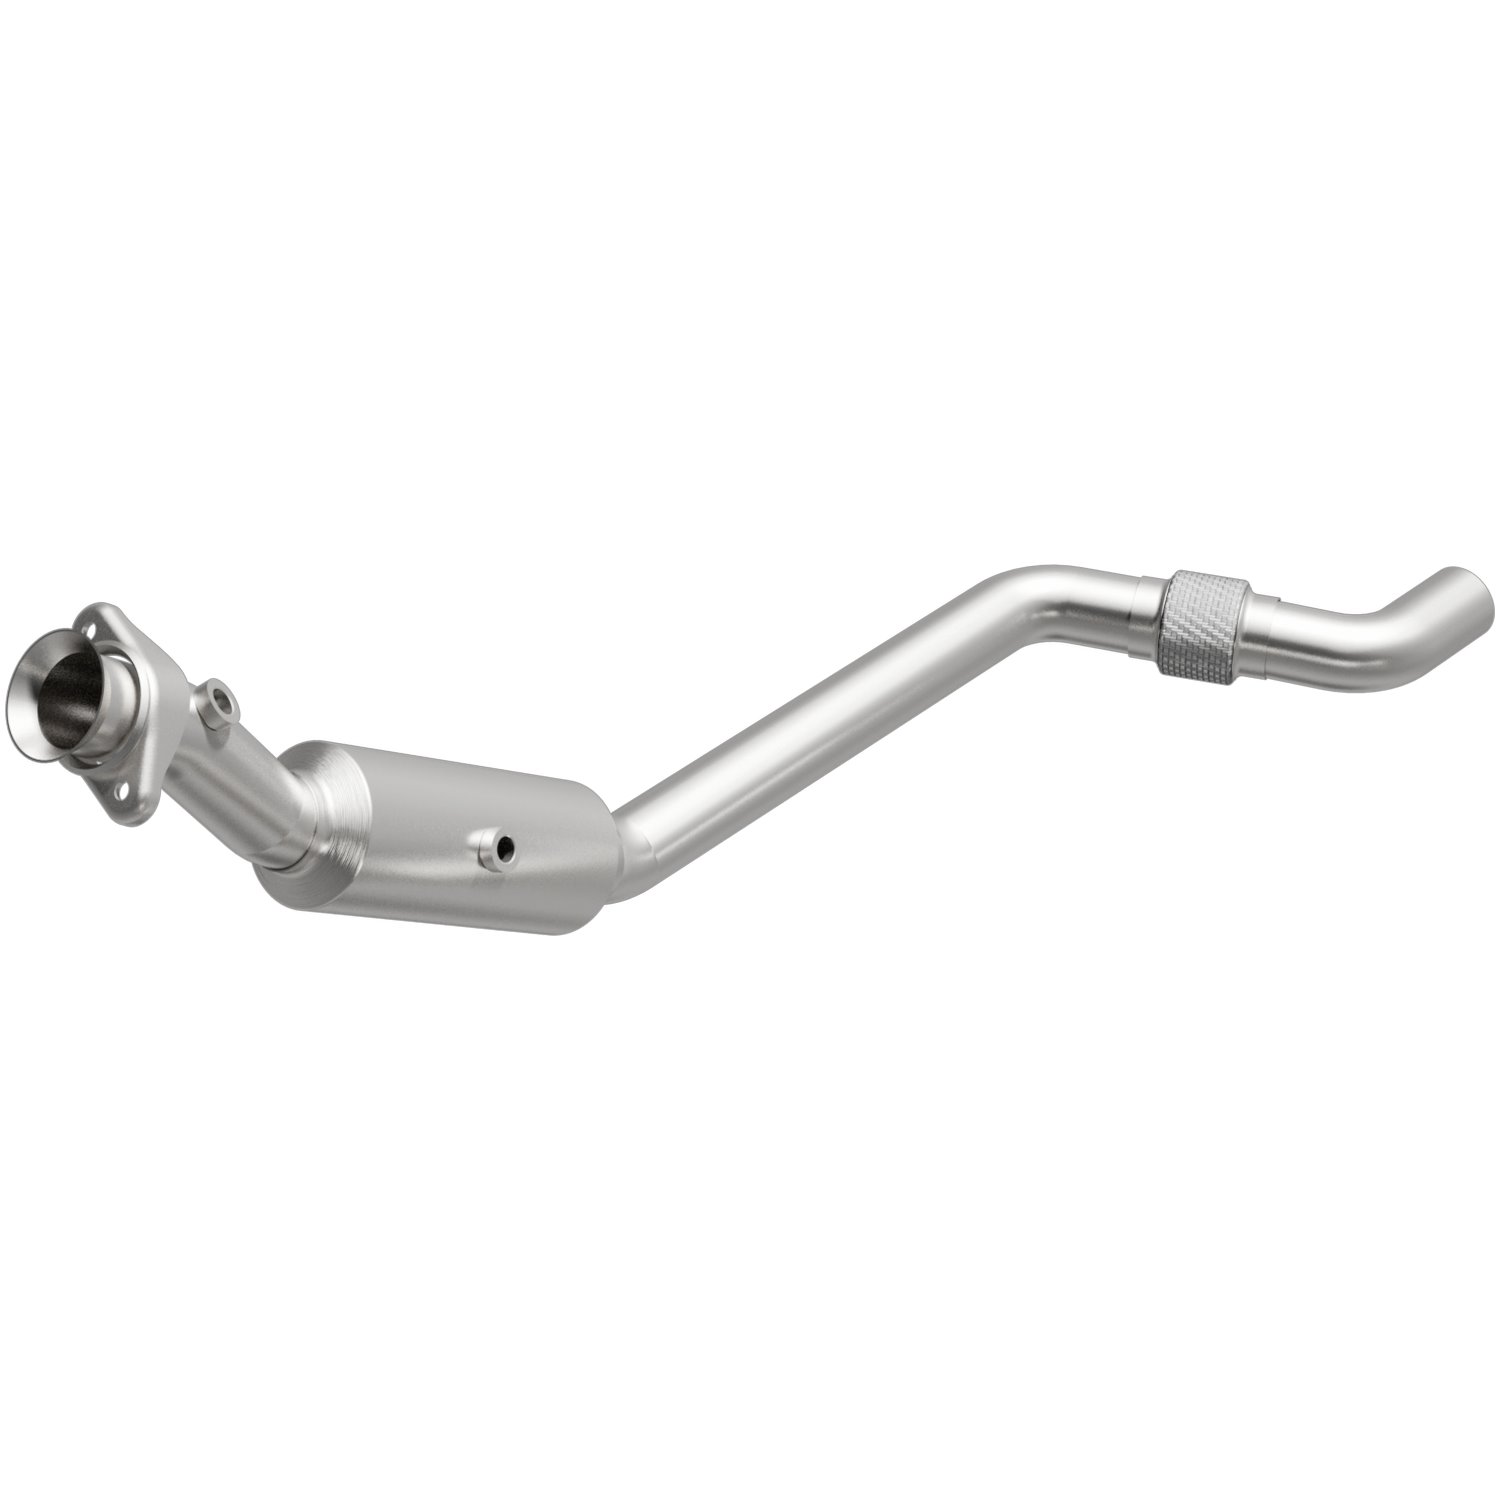 2015-2017 Ford Mustang OEM Grade Federal / EPA Compliant Direct-Fit Catalytic Converter 21-472